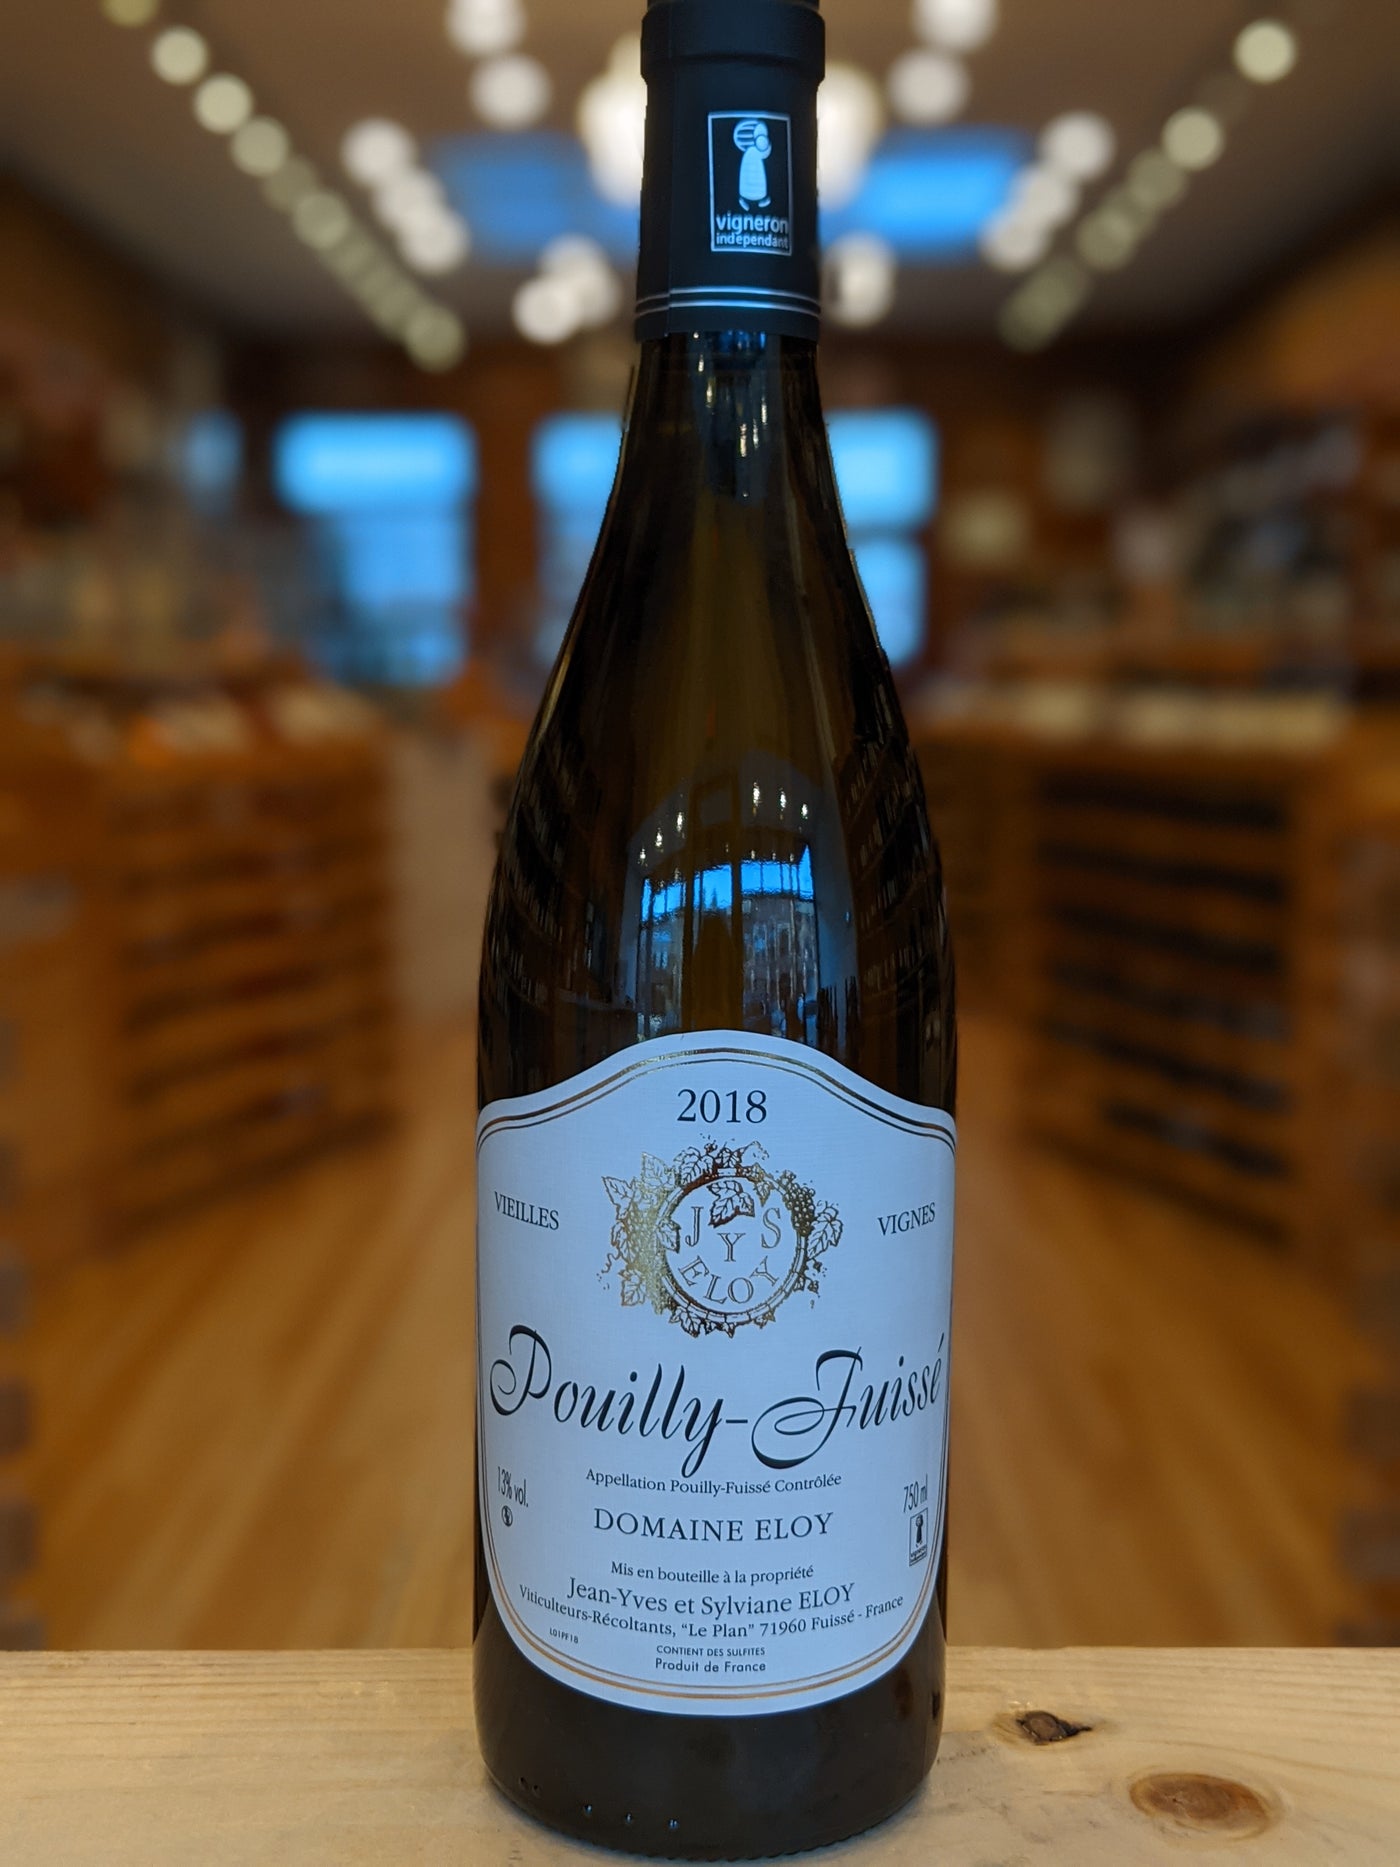 Domaine Eloy Pouilly Fuisse 2018